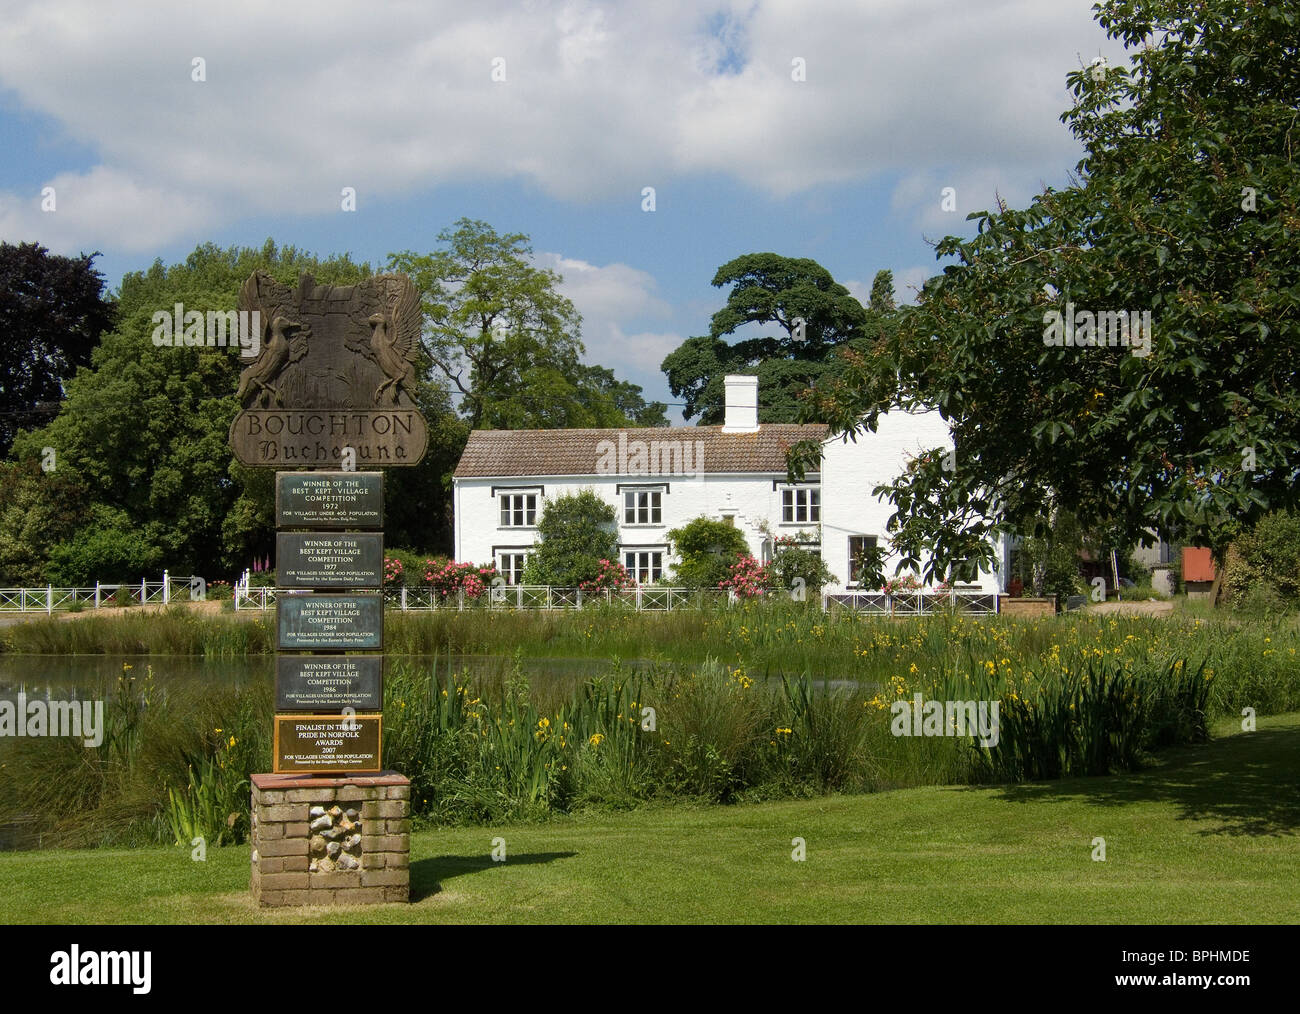 Boughton village sign in Norfolk, England looking across the duck pond to Manor Farmhouse in the background on a sunny June day Stock Photo